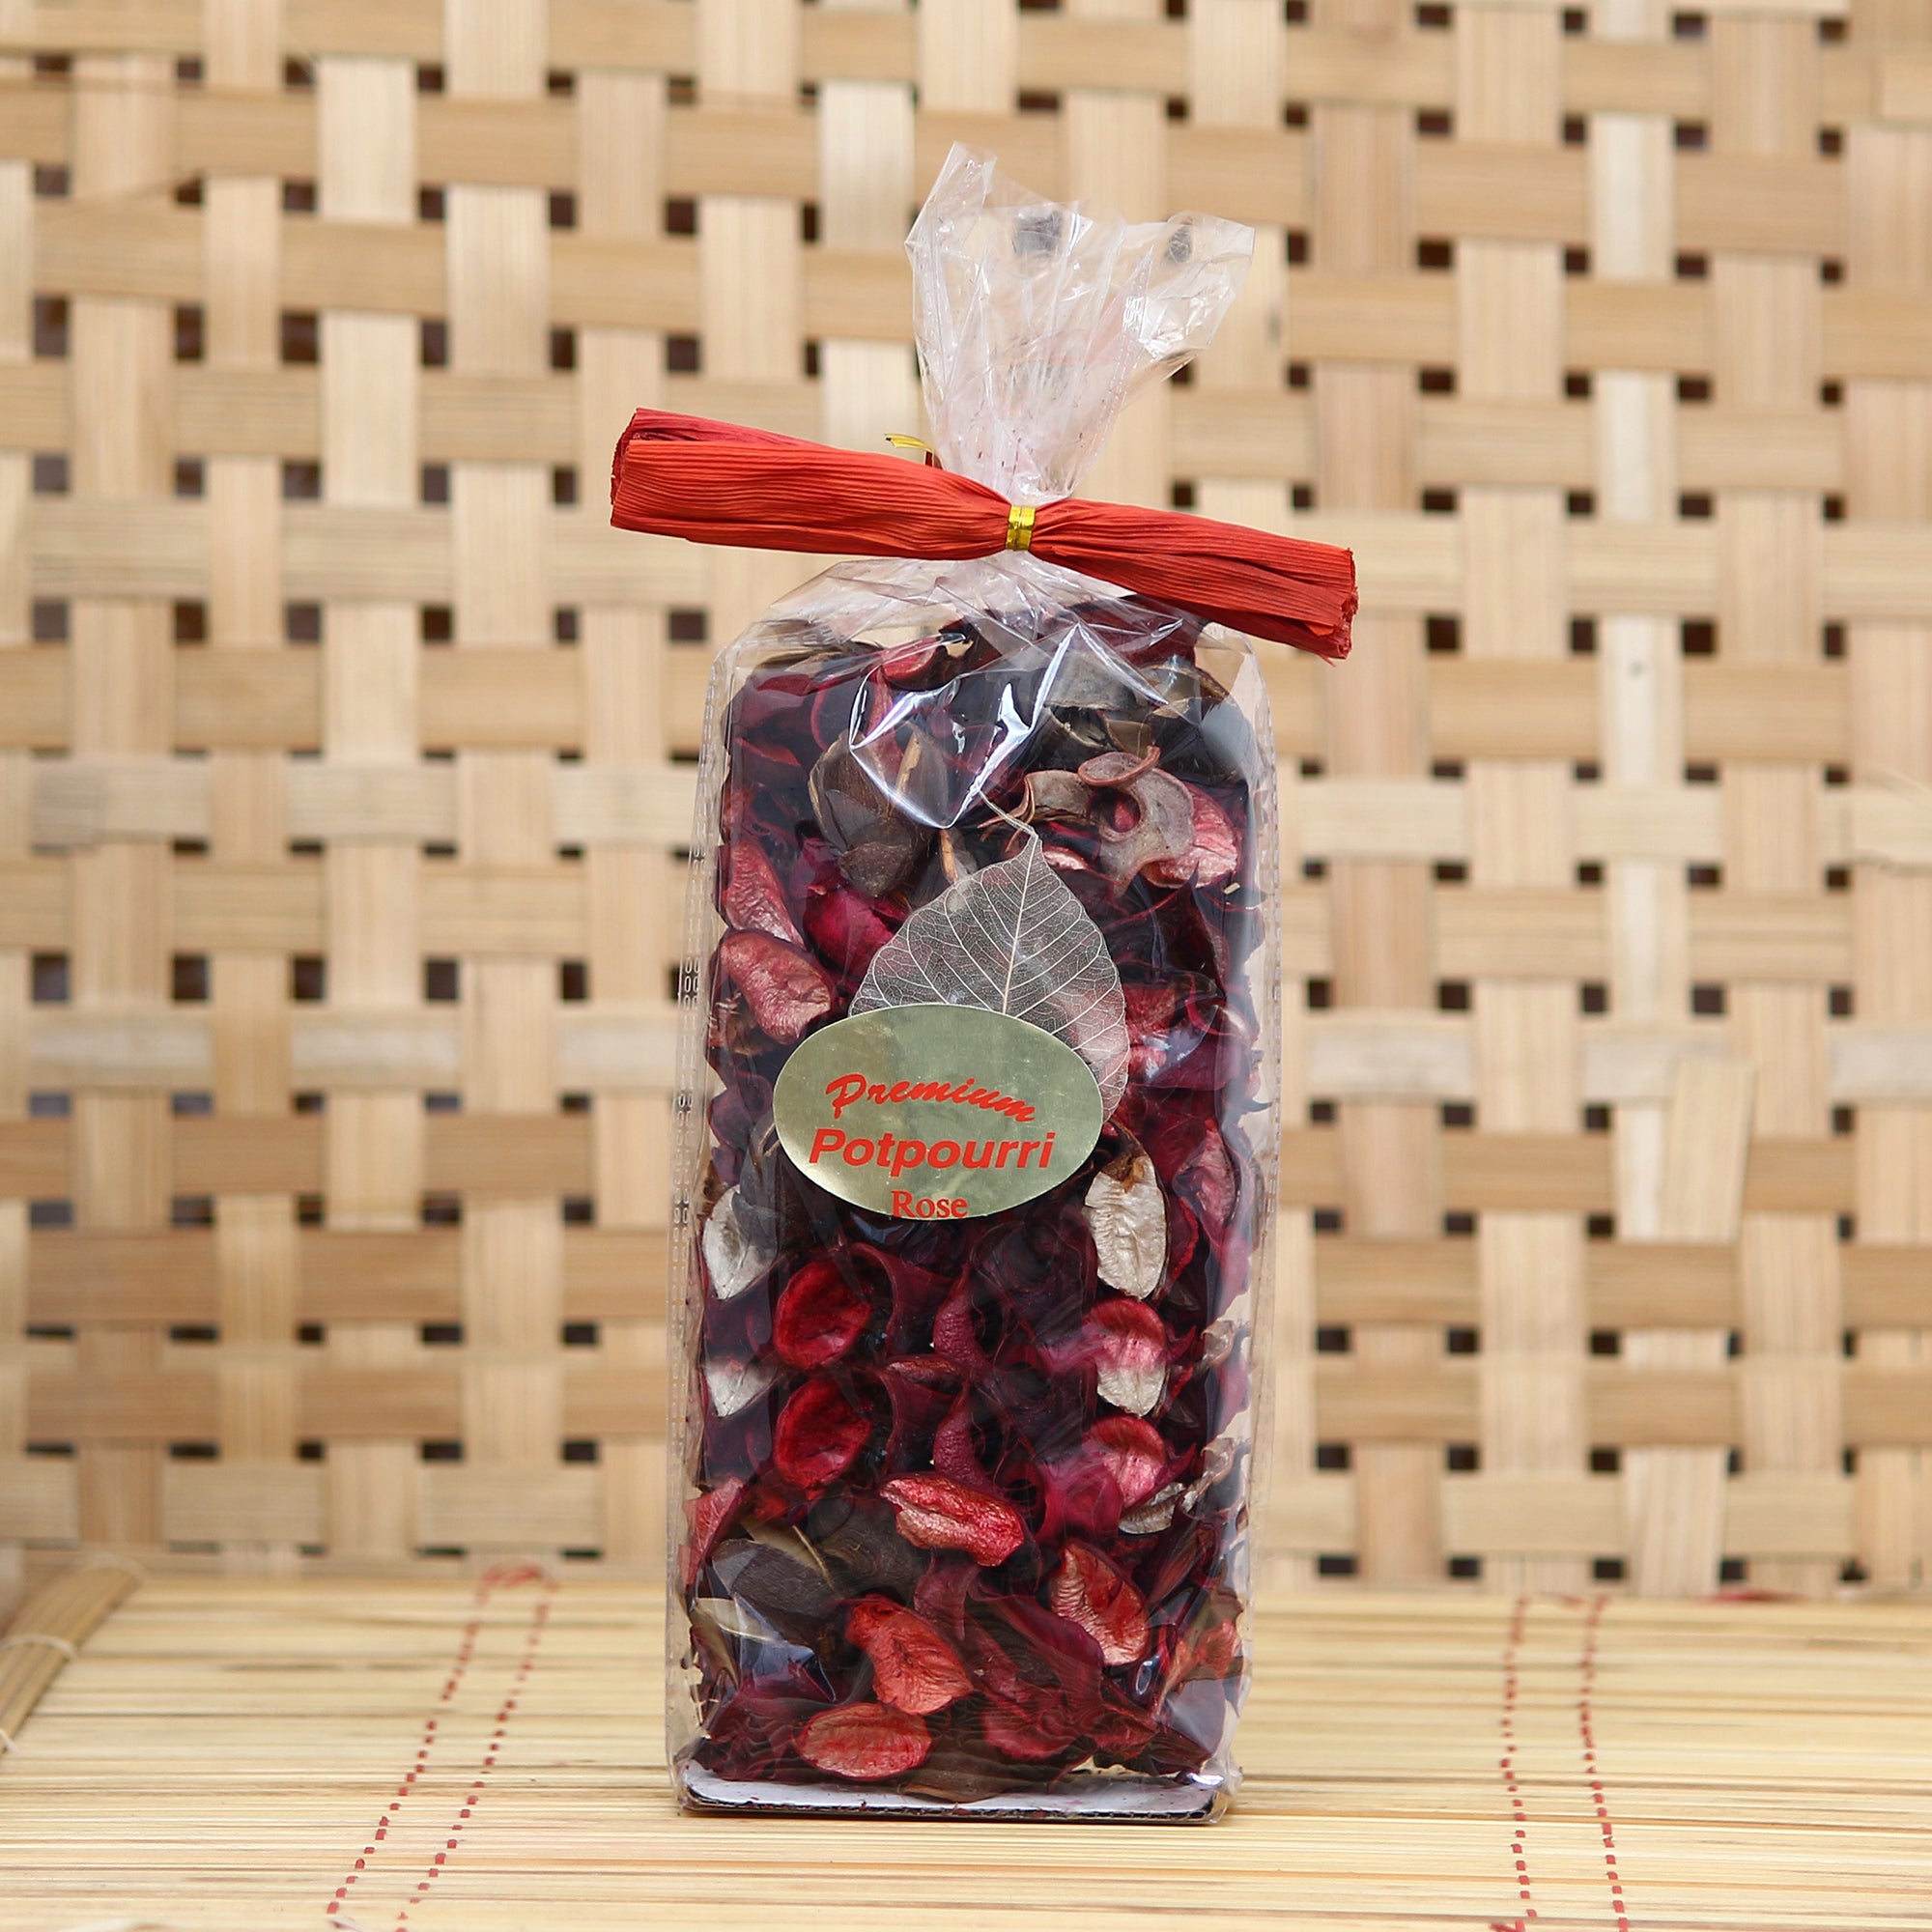 Red Petals Potpourri with Rose Fragrance for Multipurpose use as Home Decor